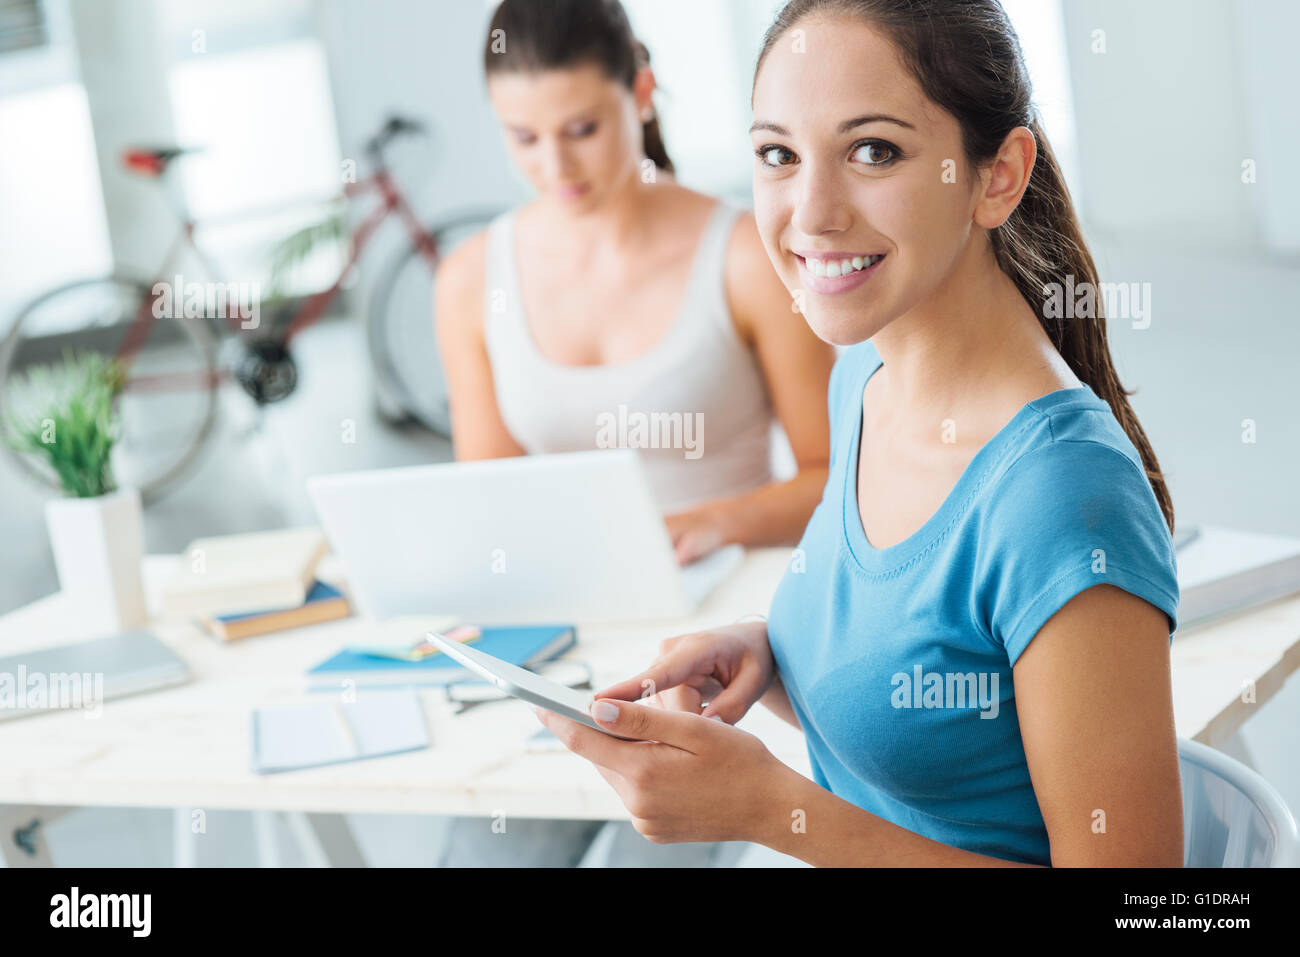 Cute young girl using a digital touch screen tablet and smiling at camera, her friend is sitting at desk and using a laptop Stock Photo